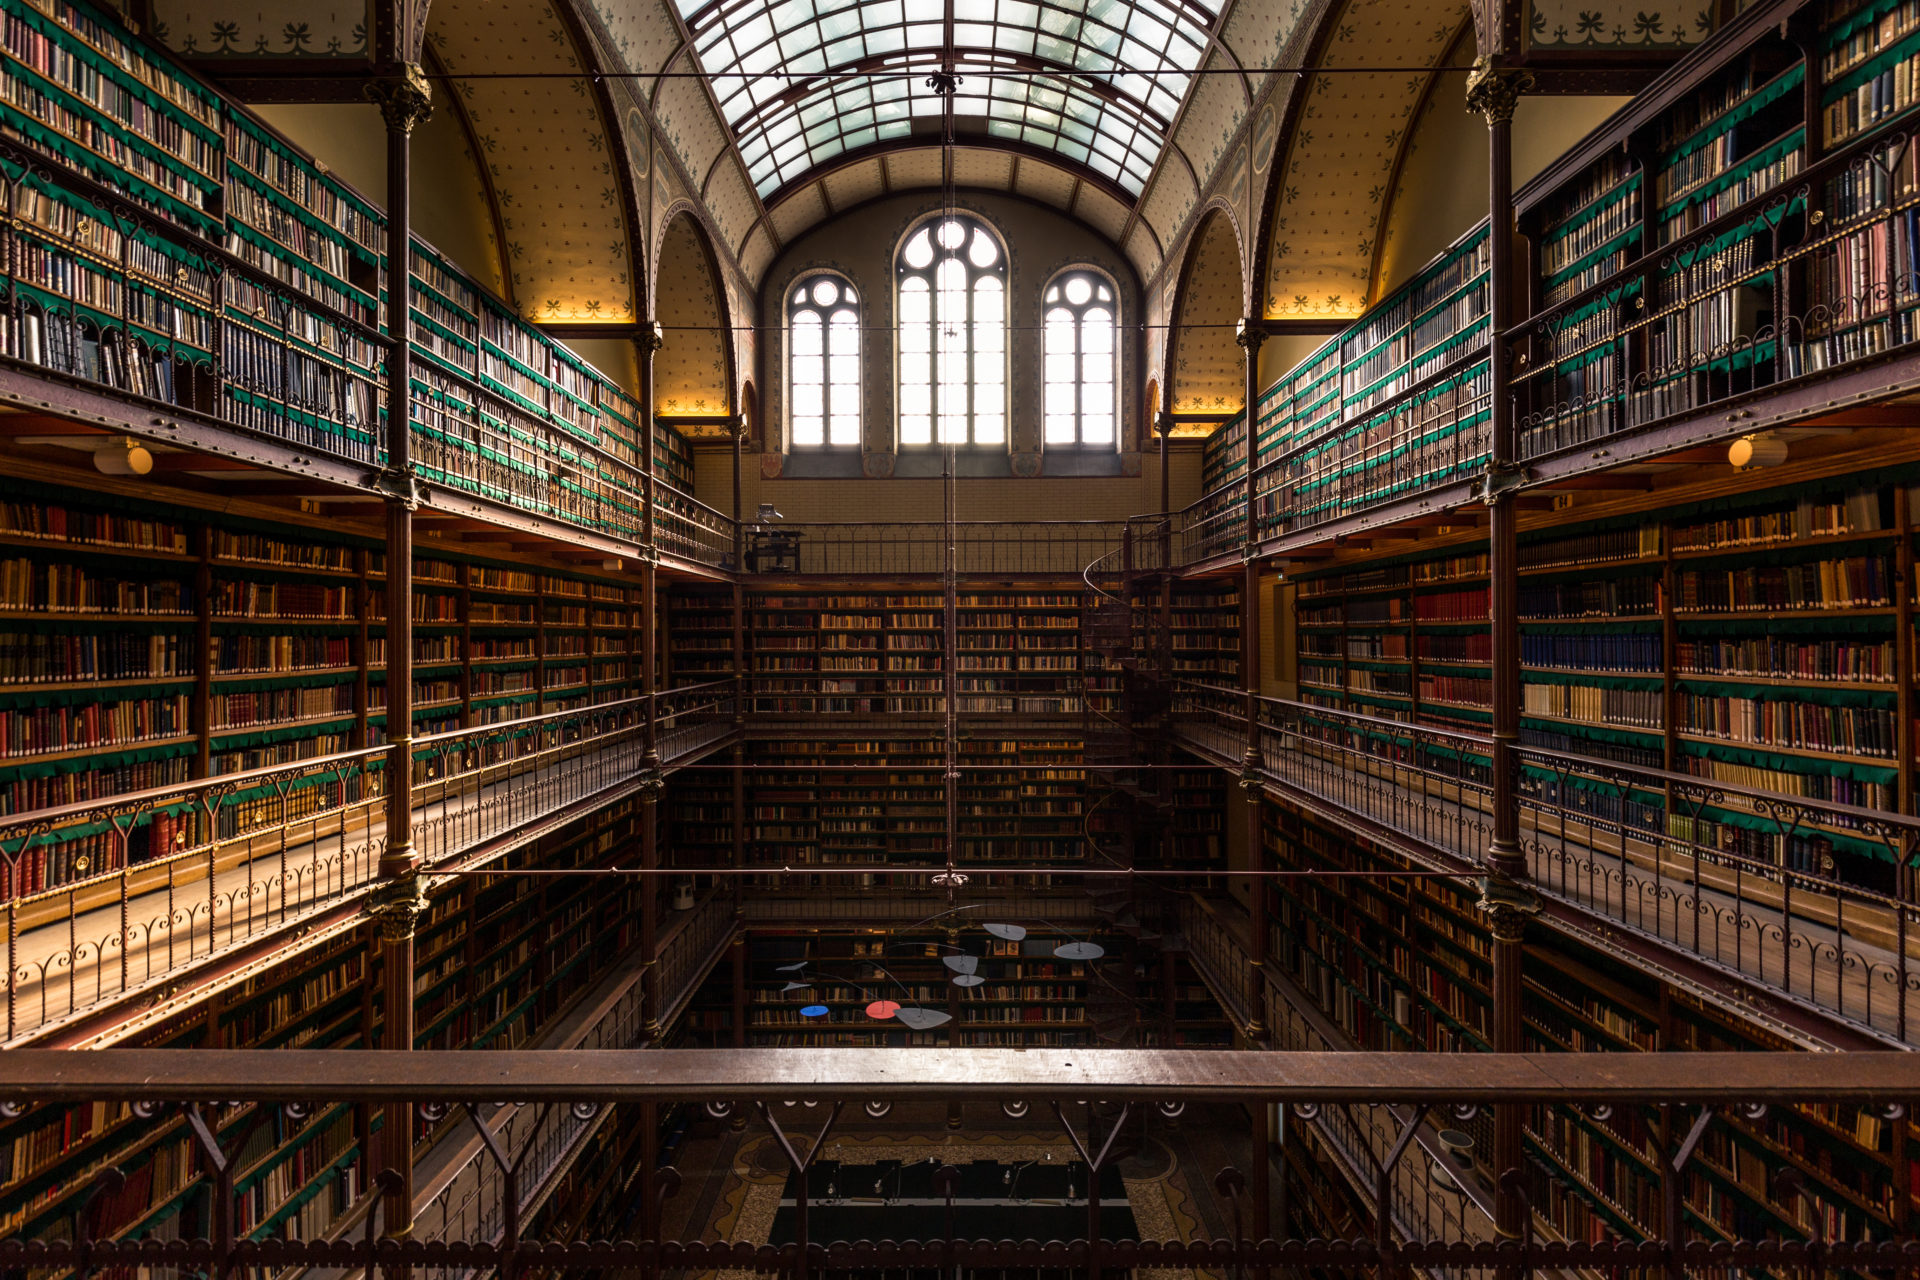 The World’s Most Beautiful Libraries